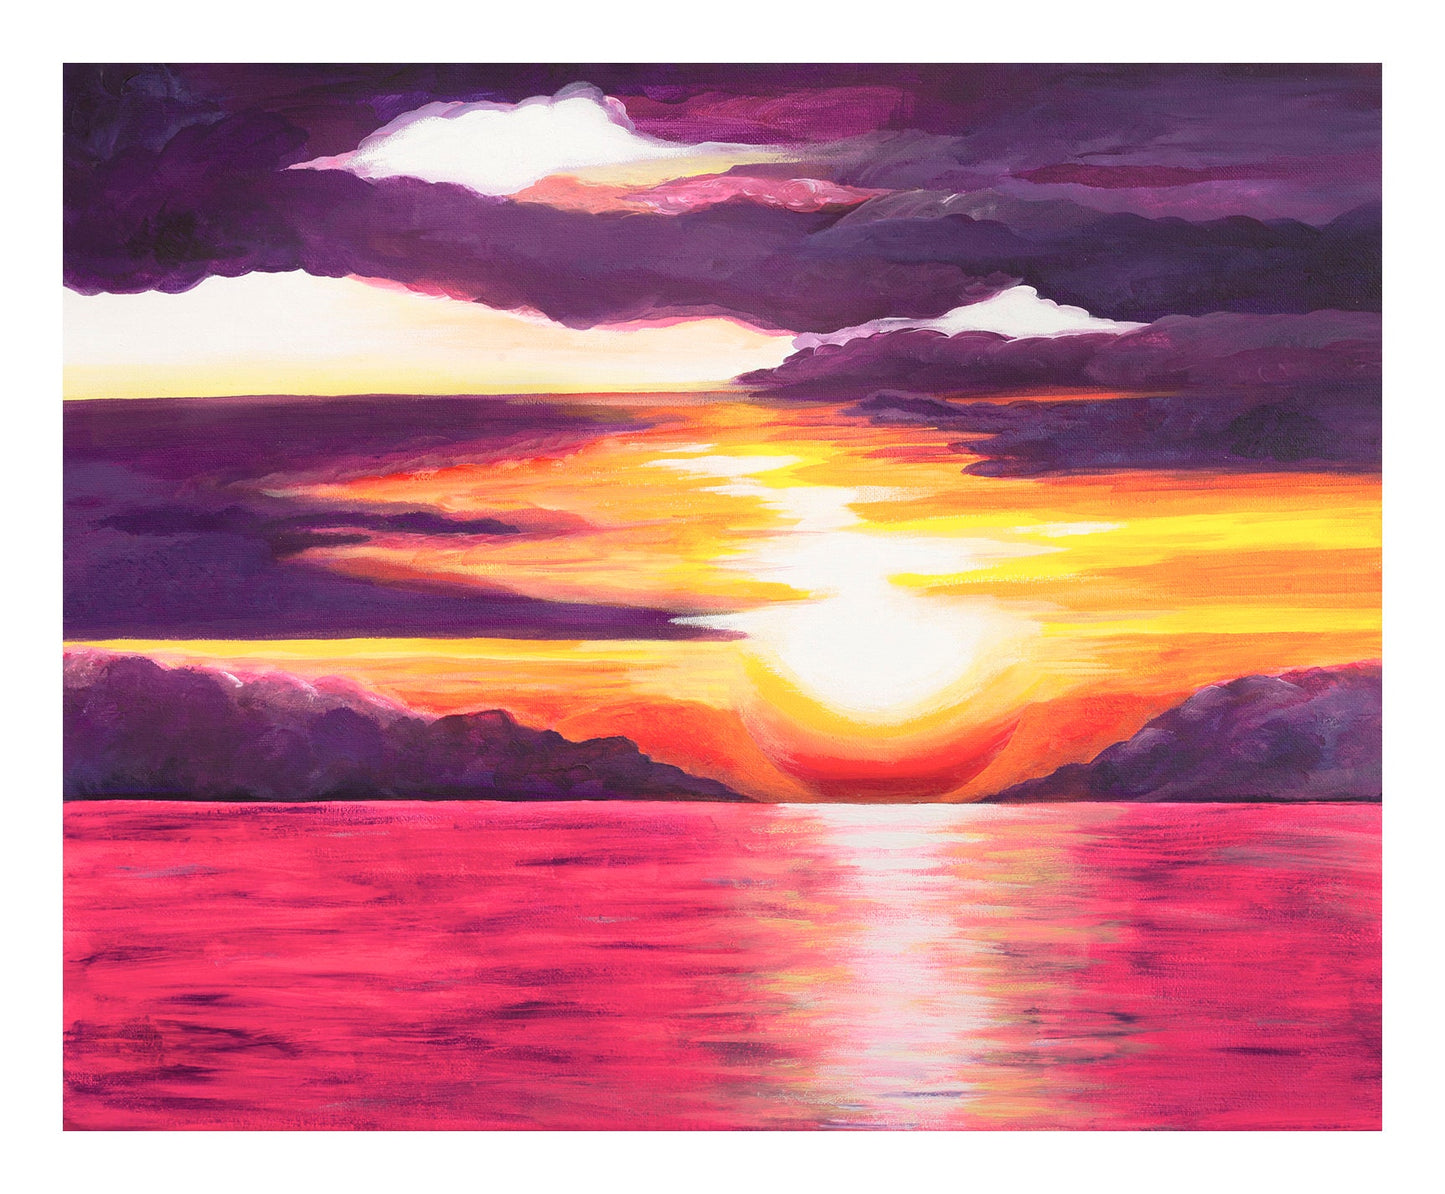 Print of Original Pink and Purple Sunset Over Water Painting, Matted, Vibrant Colors, Beachy / Coastal / Nautical Themed